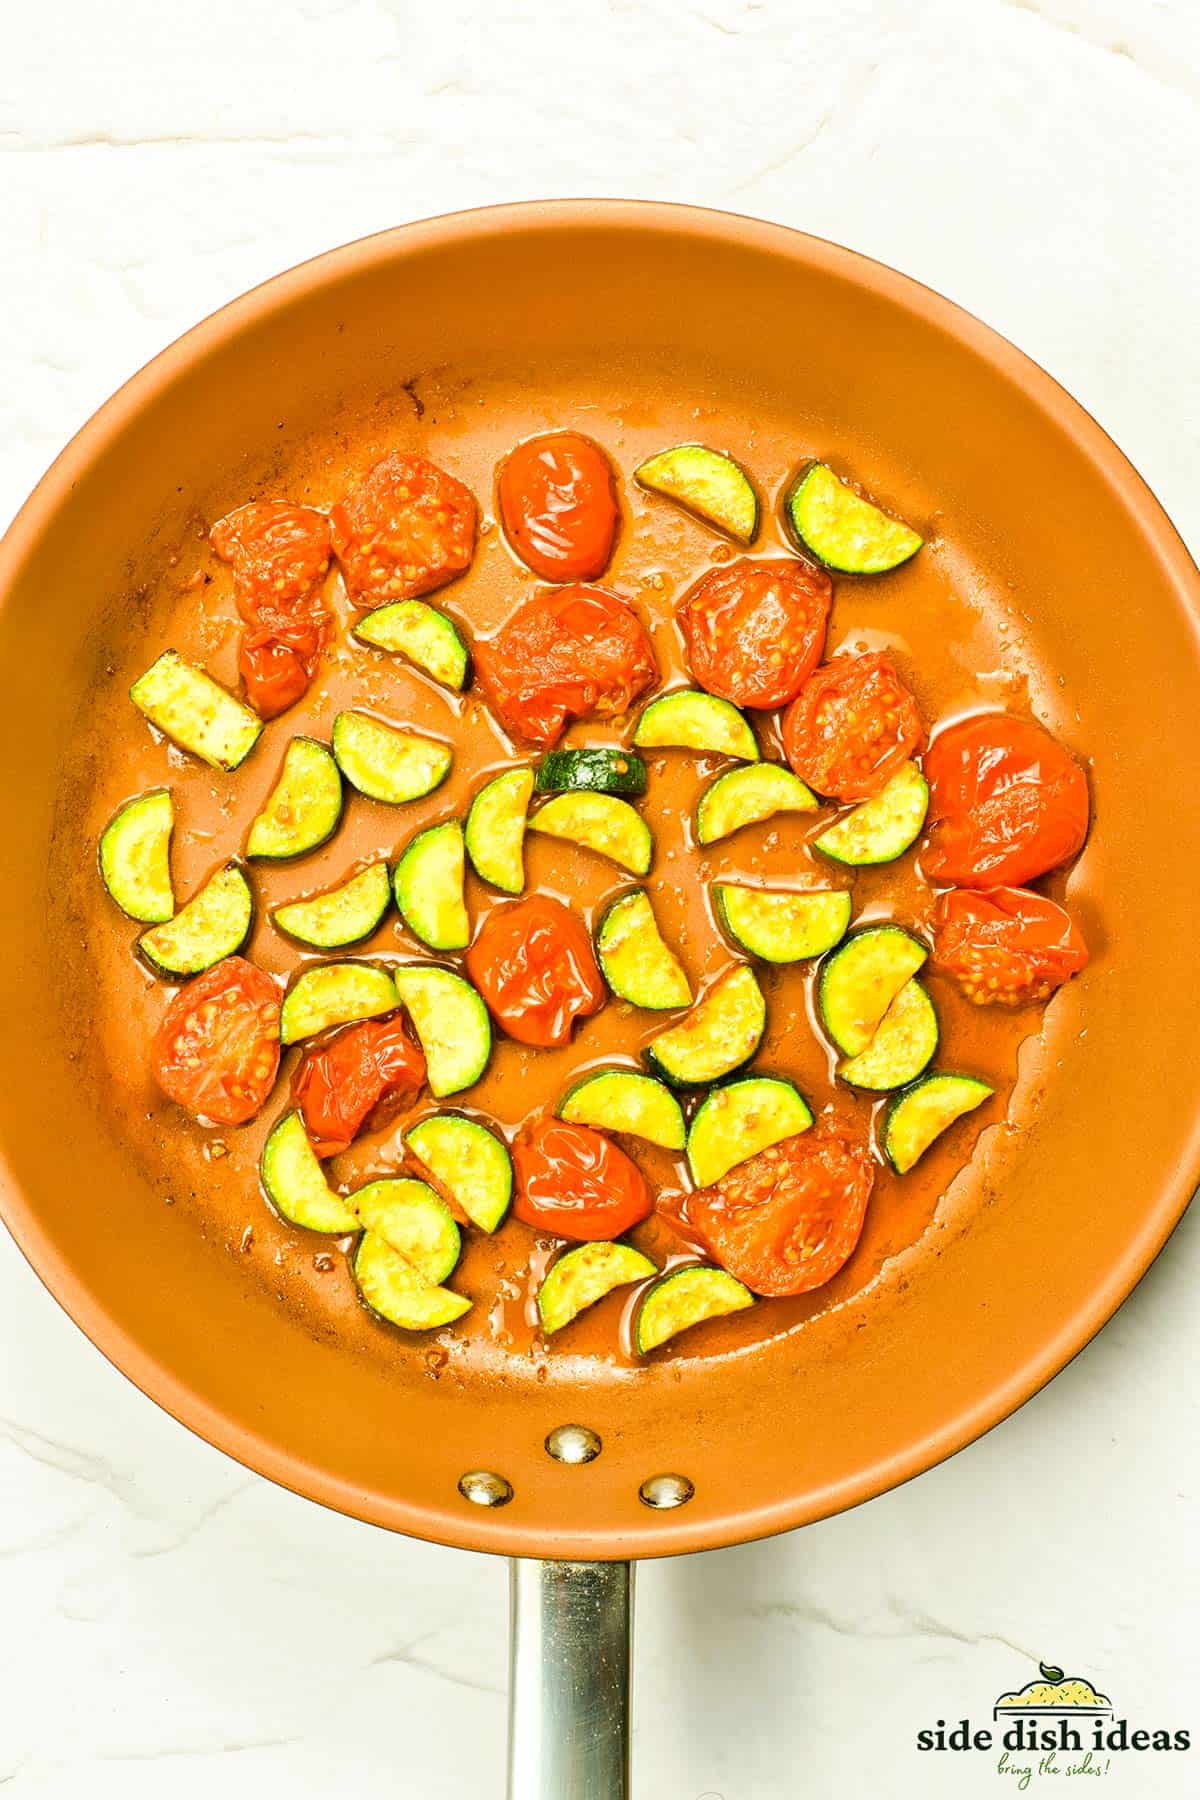 zucchini and tomatoes sauteed in a pan